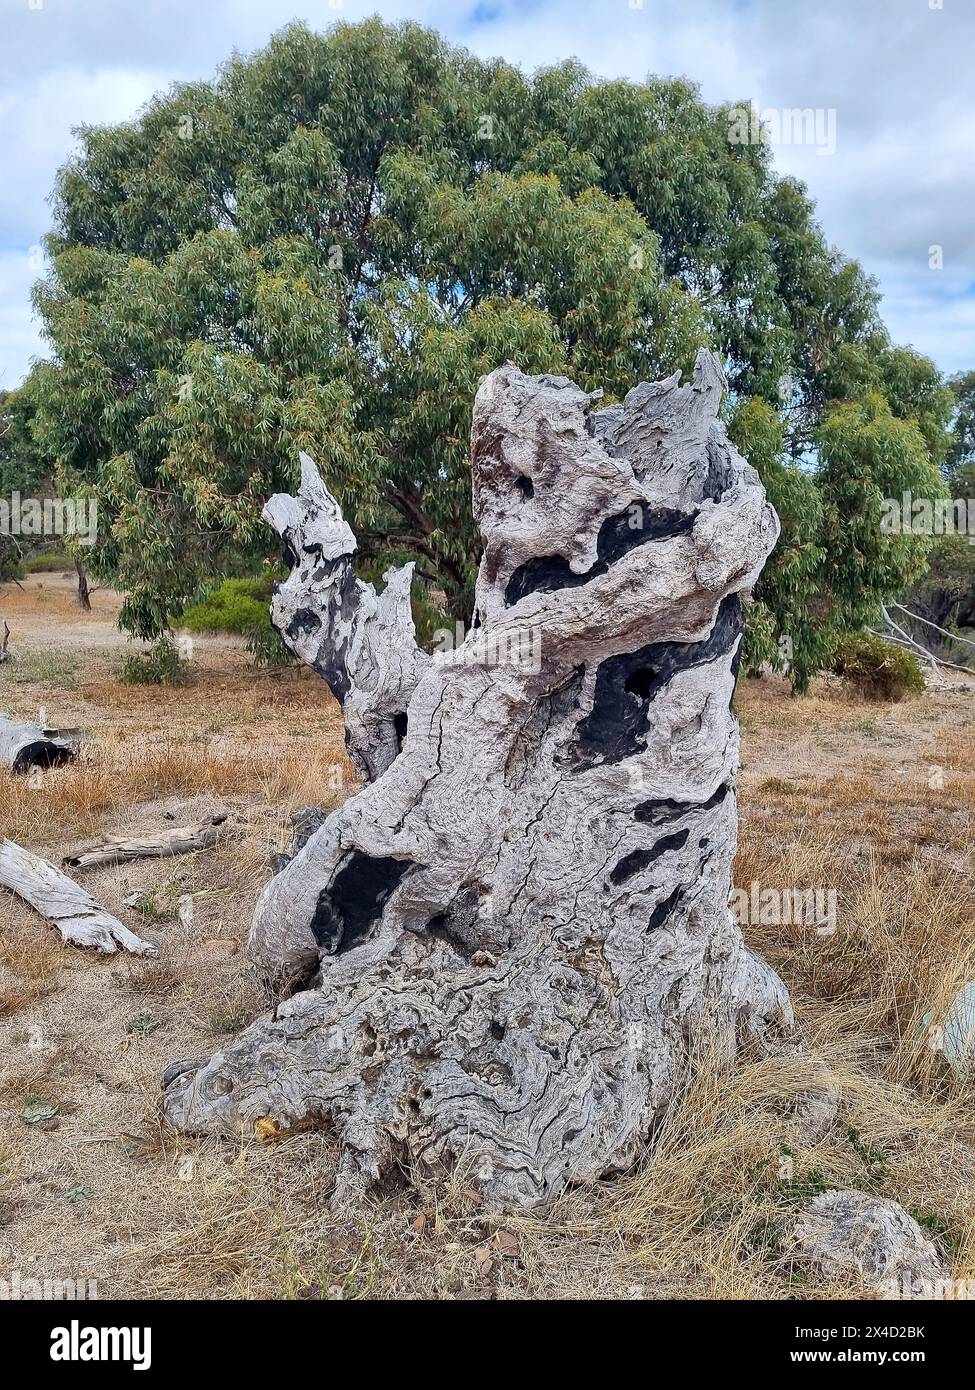 Unusual wooden stump from an old tree that looks like a sculpture, art in nature  Stock Photo